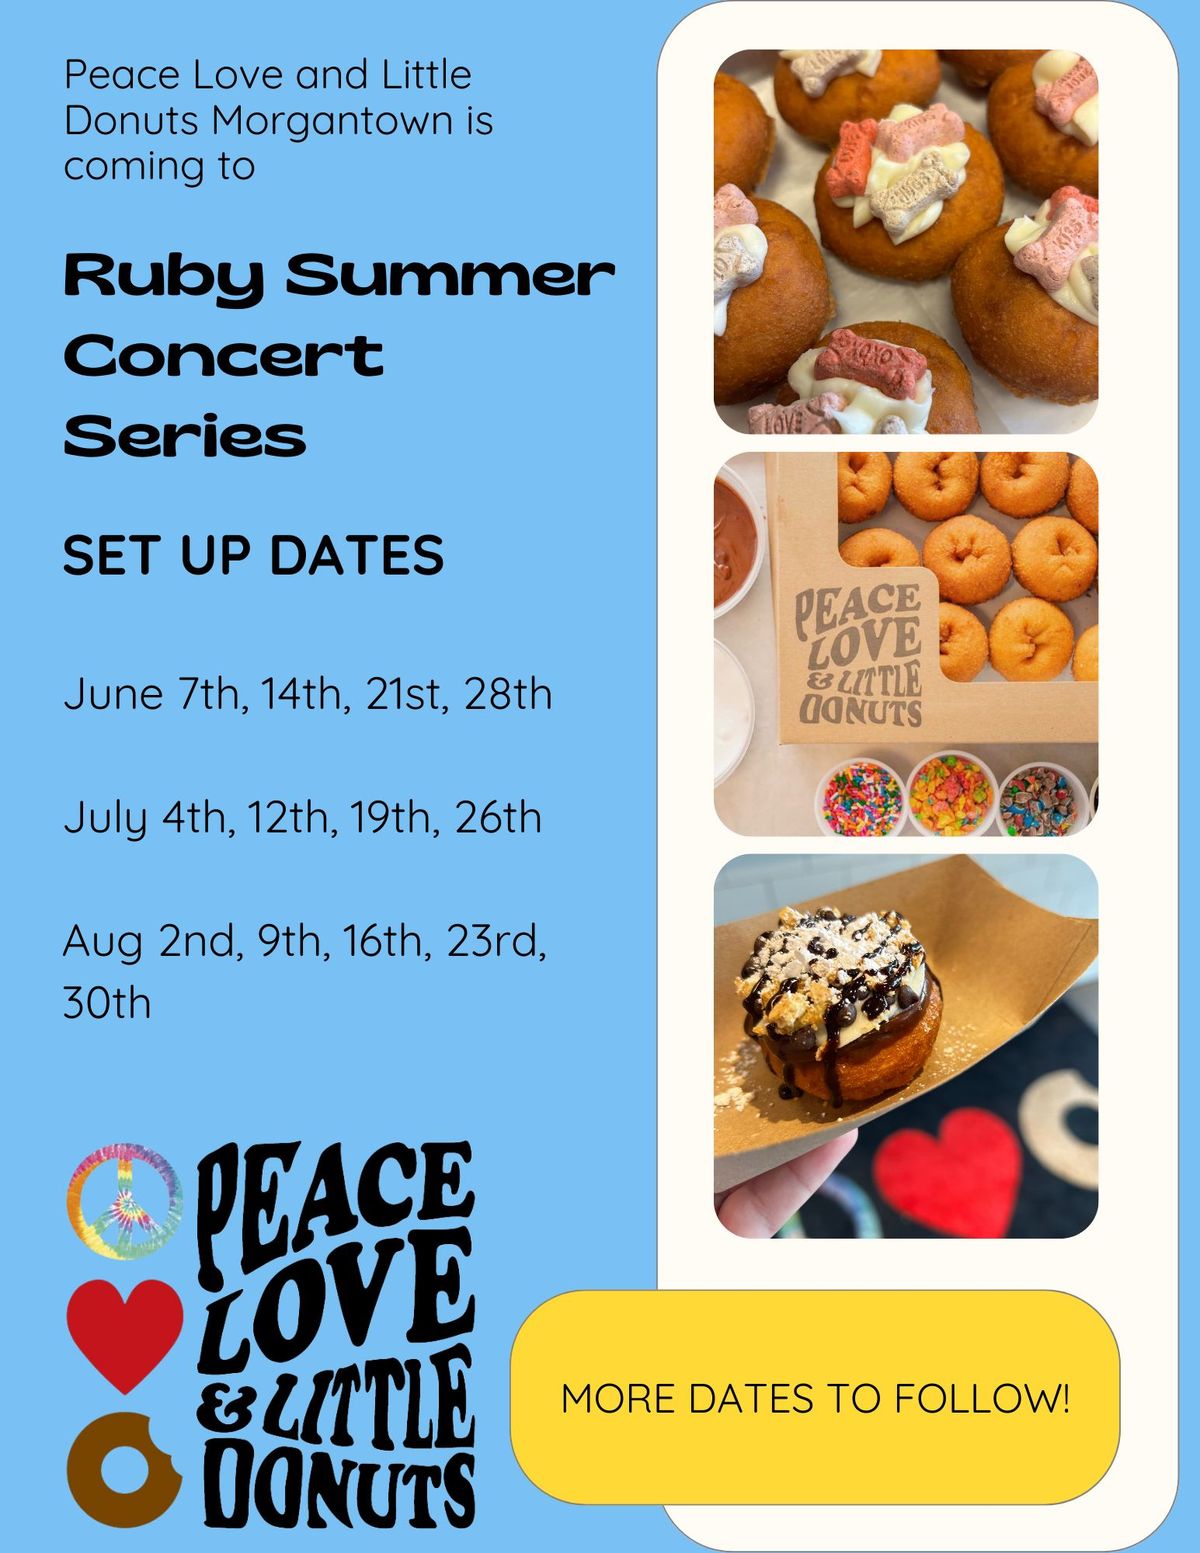 Peace Love and Little Donuts at the Ruby Summer Concert Series